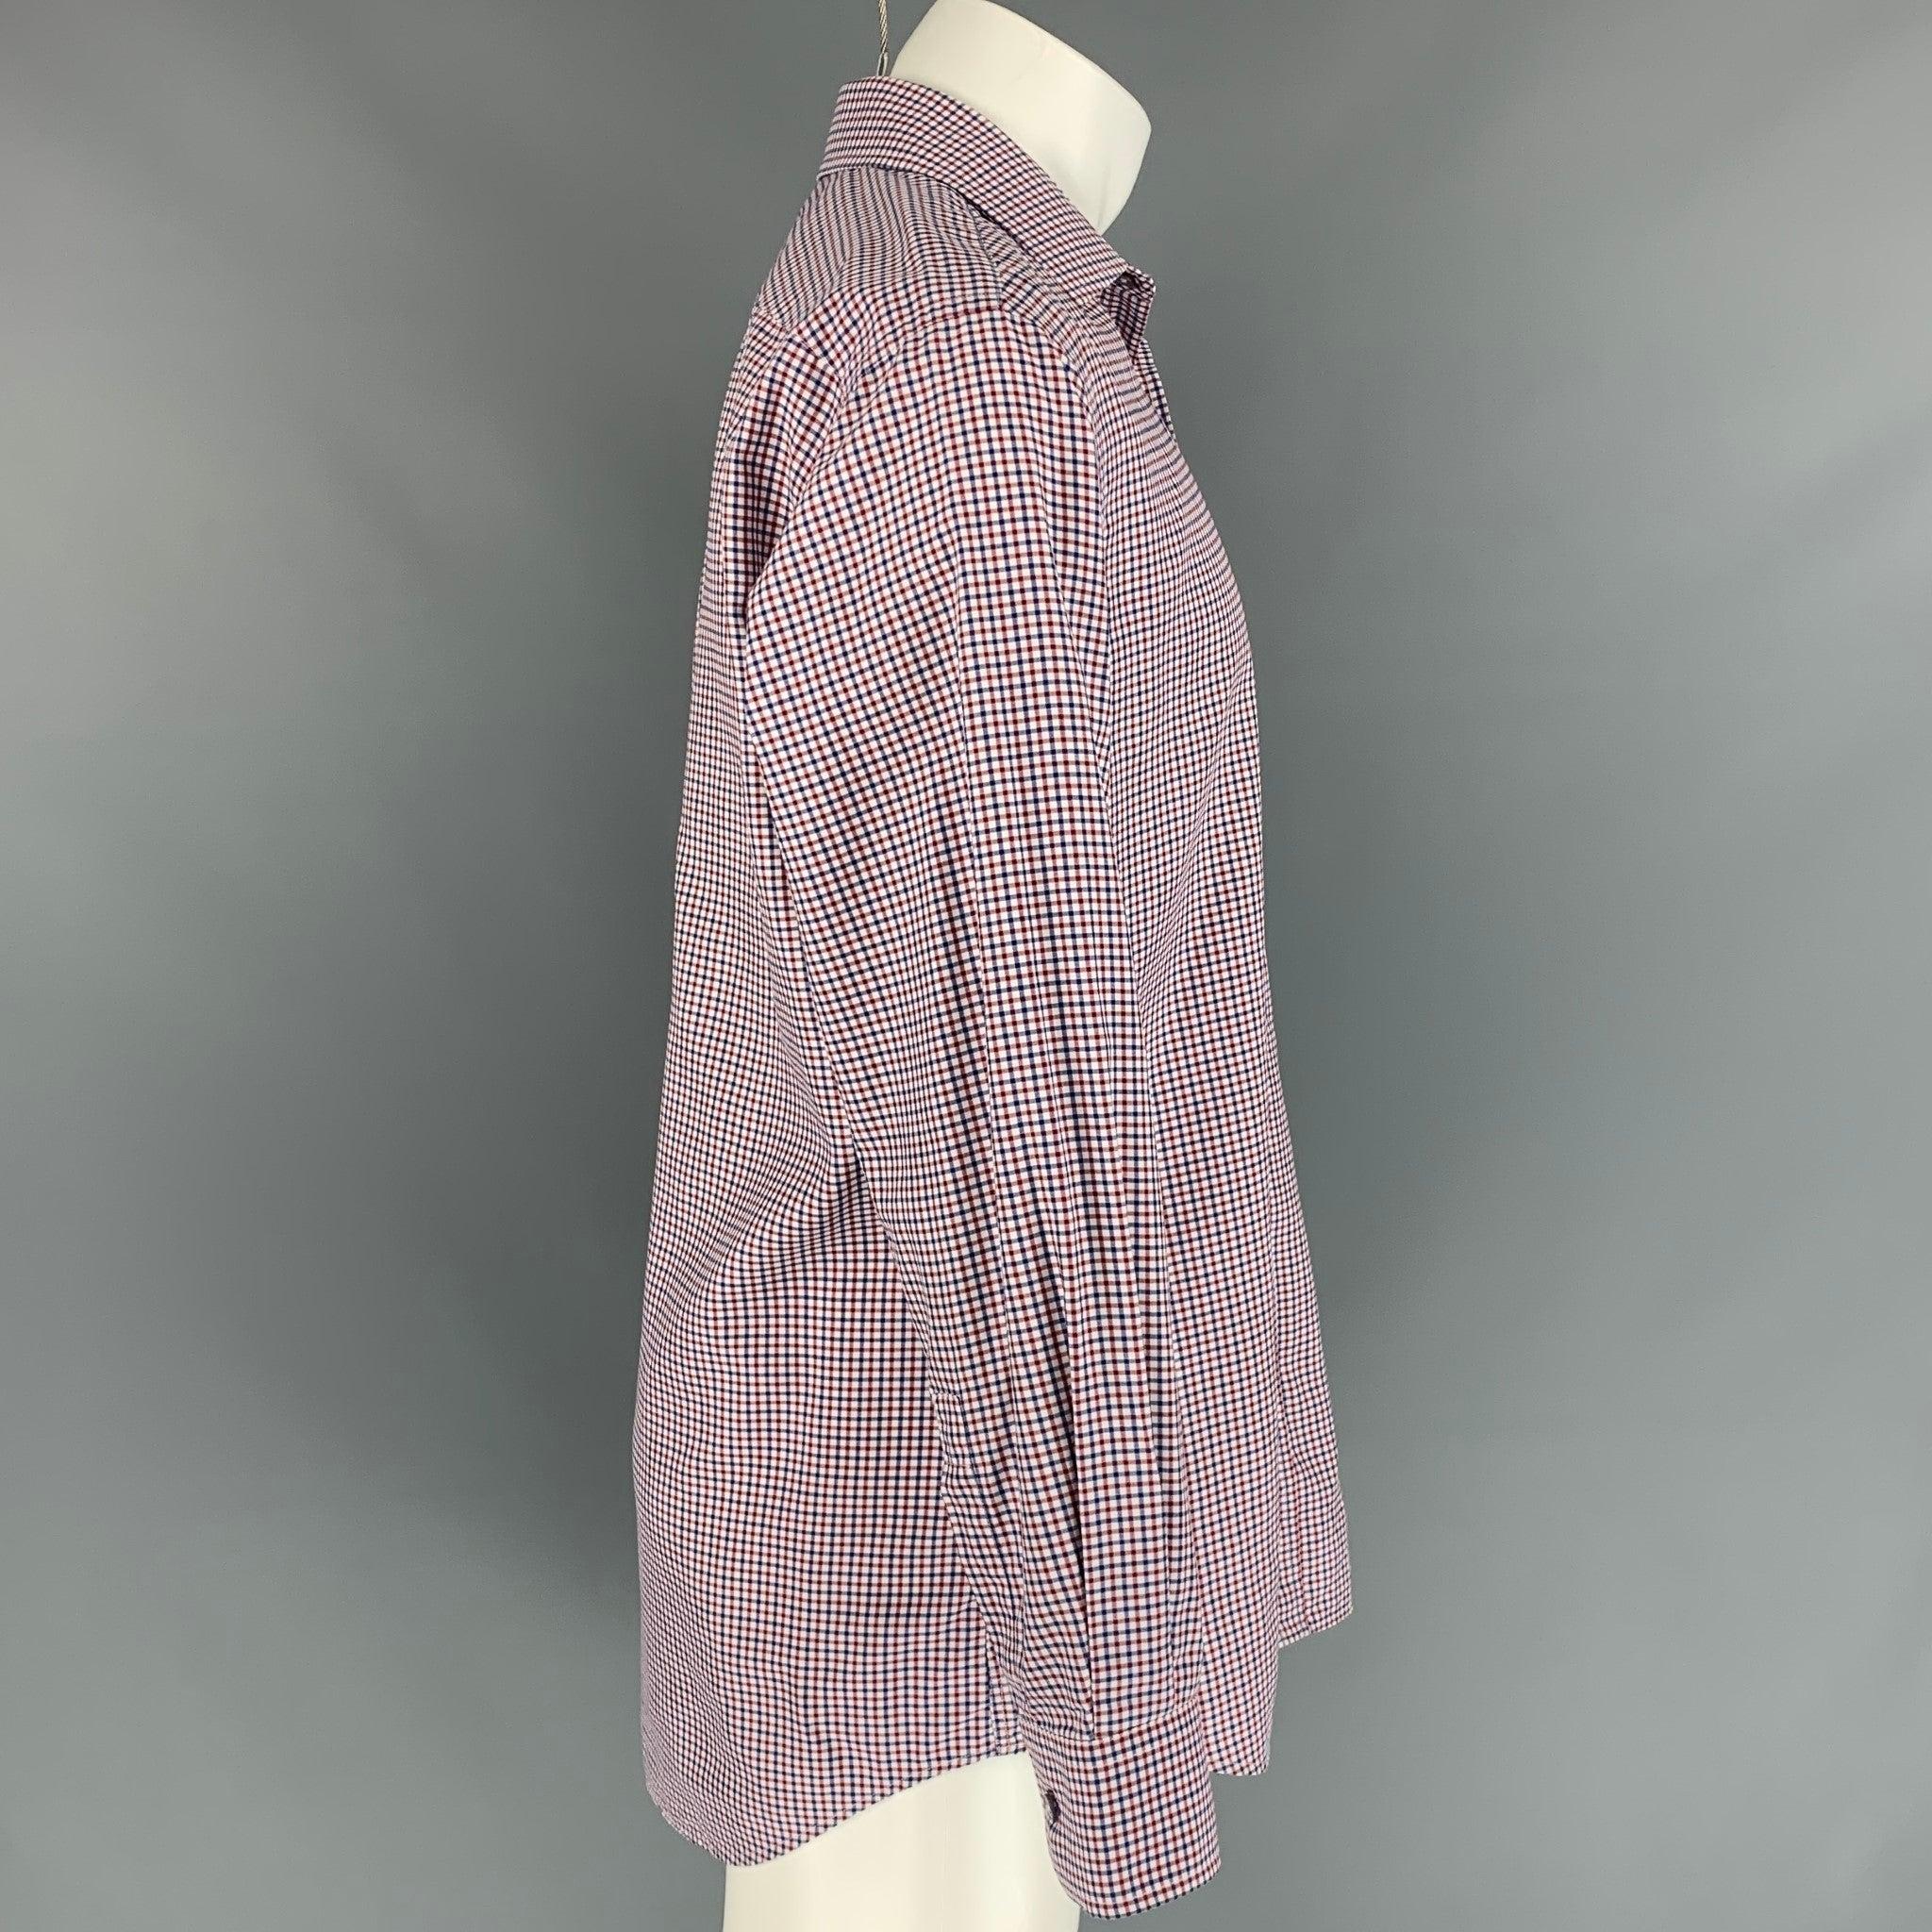 PAUL SMITH long sleeve shirt comes in a red & blue checkered cotton featuring a classic fit, spread collar, and a buttoned closure. Made in Italy.
Very Good
Pre-Owned Condition. 

Marked:   16.5/39 

Measurements: 
 
Shoulder: 19 inches  Chest: 44